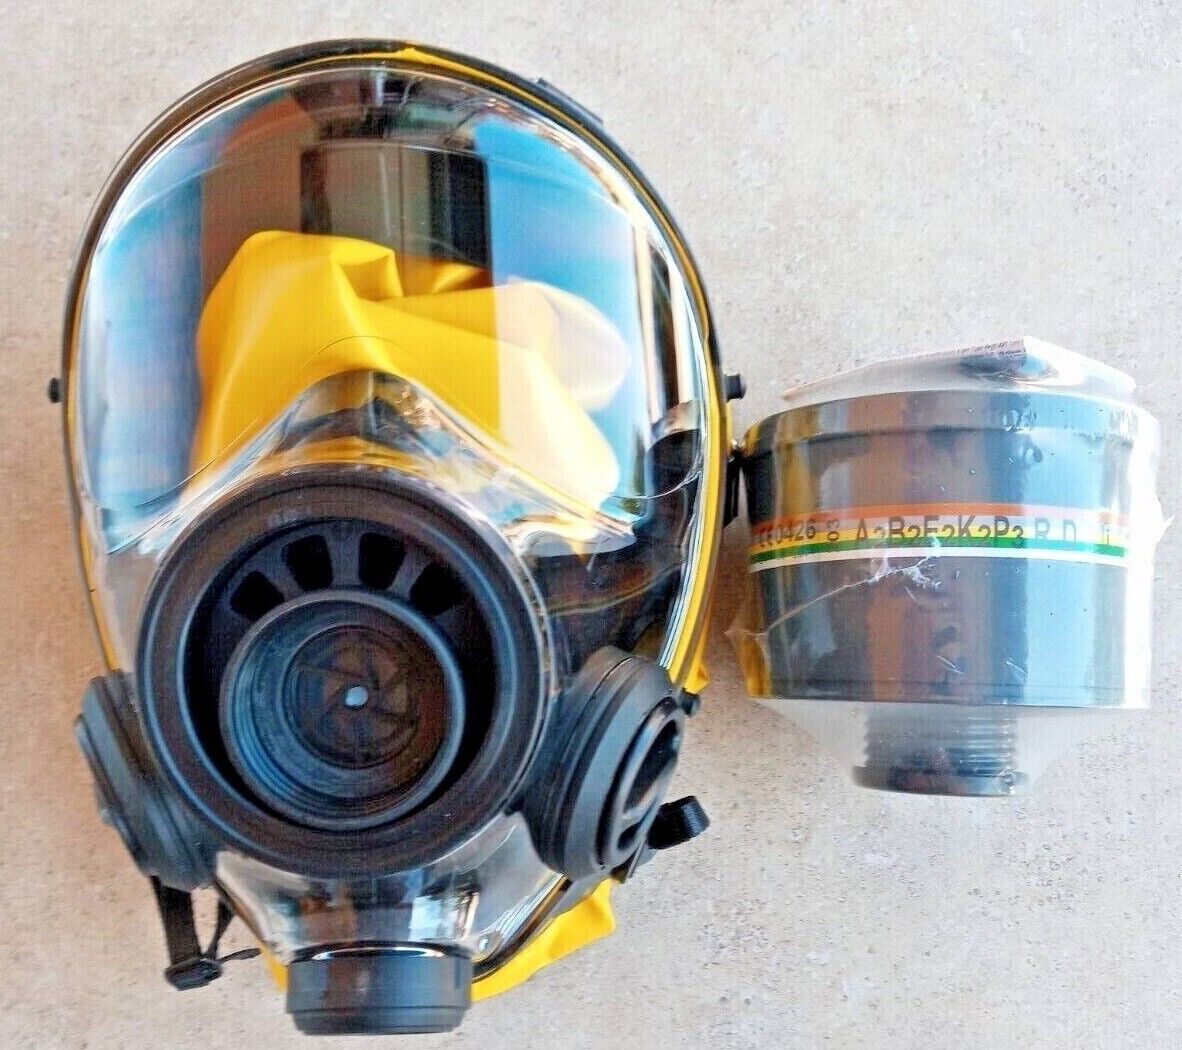 SGE 400/3 40mm NATO NBC Gas Mask w/ Mestel Filter & PVC Hood Factory Installed